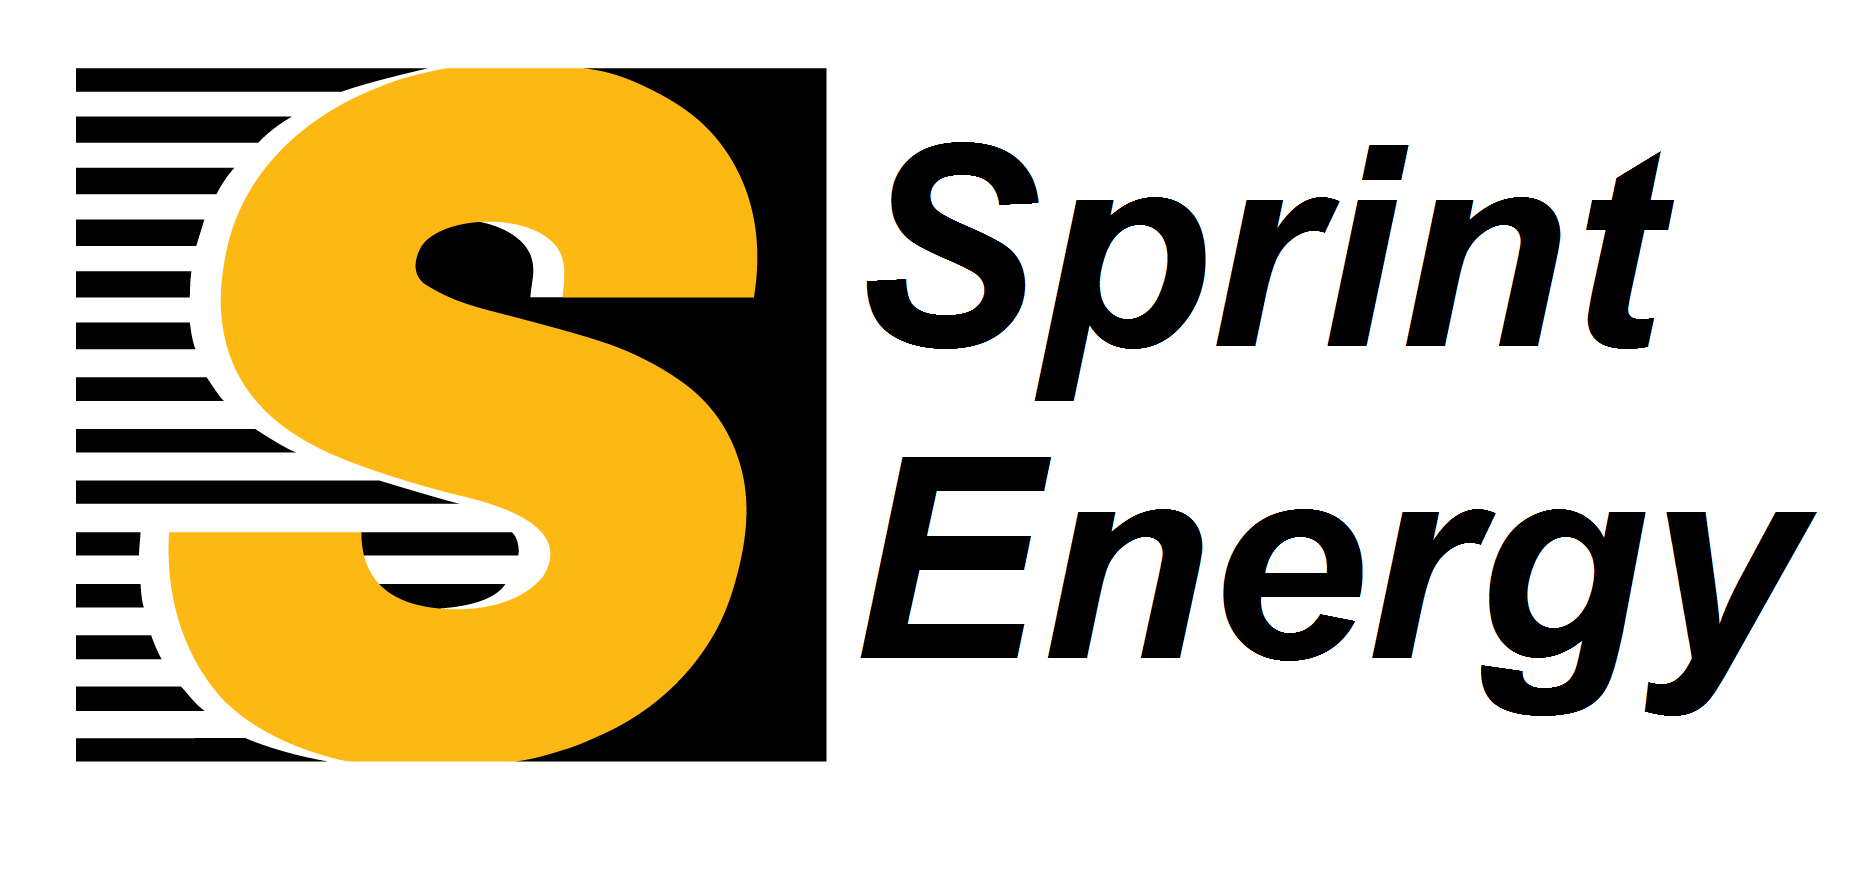 J.F. Lehman & Company Acquires Sprint Energy Services, LP, May 14 2015